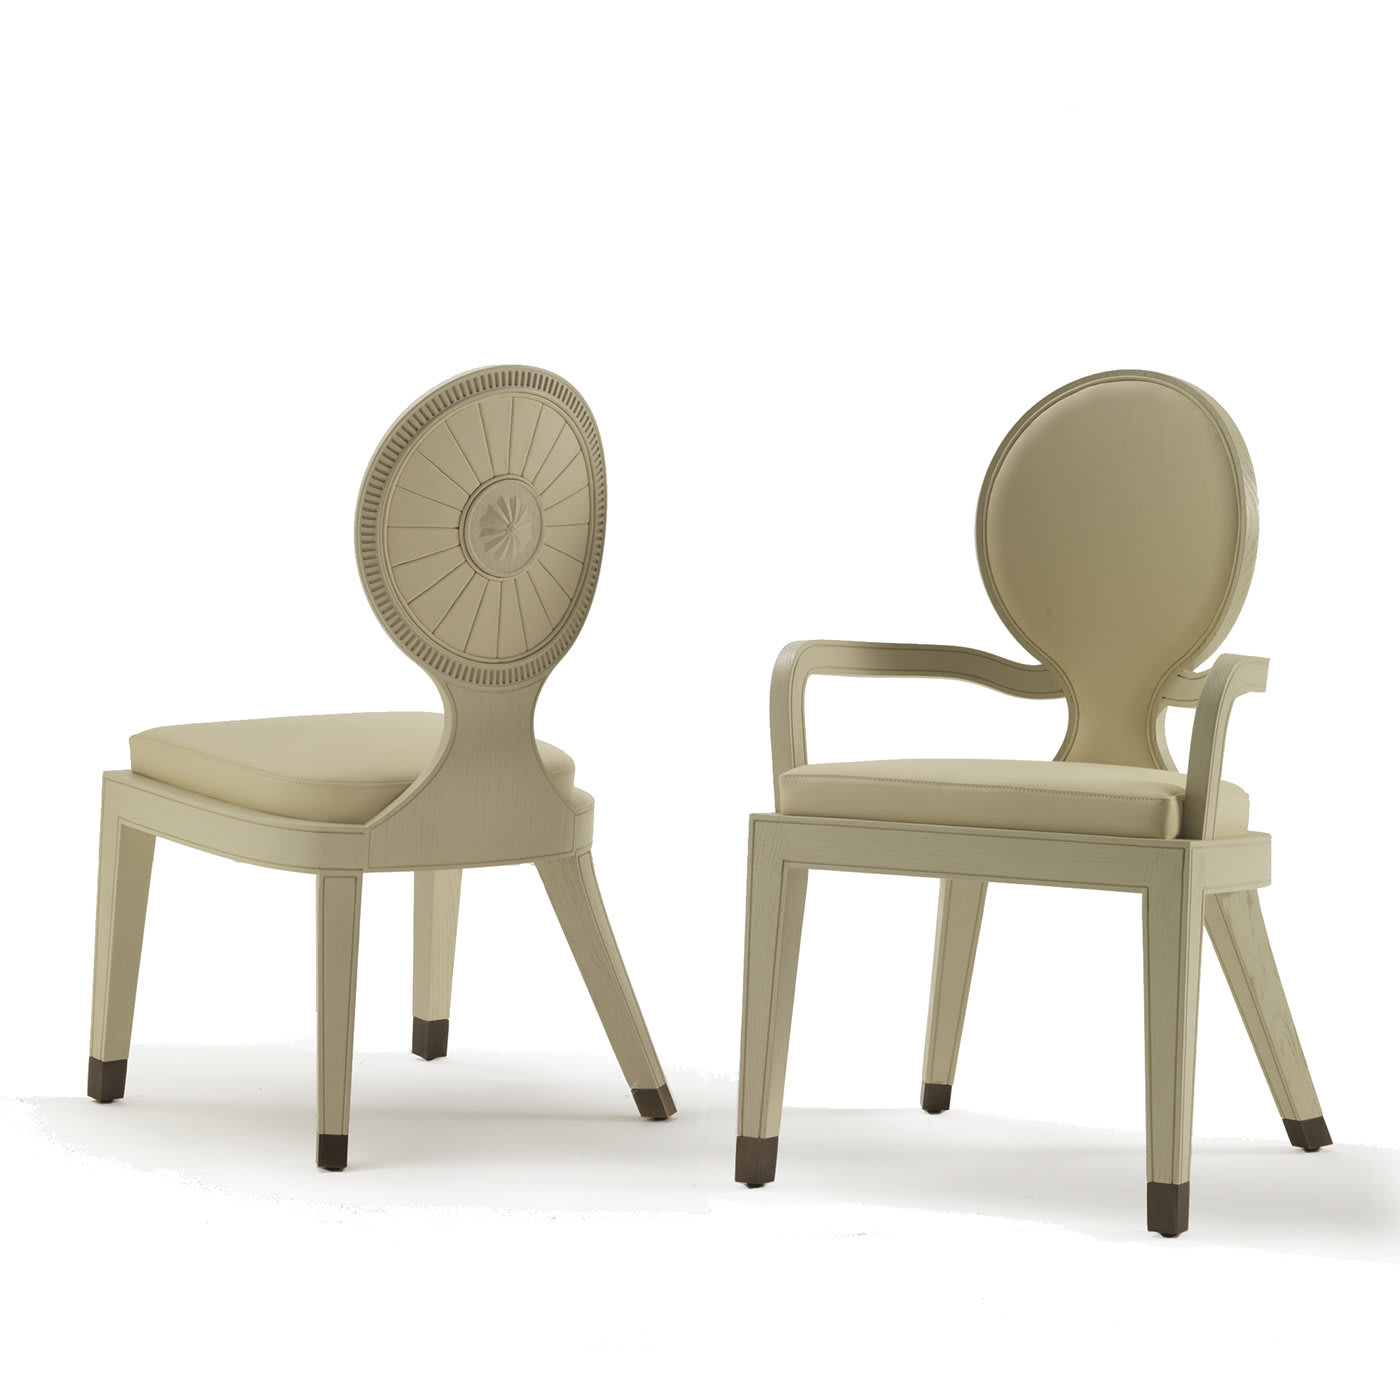 Moon & Sun Chair with Armrests by Archer Humphryes Architects - Fratelli Boffi